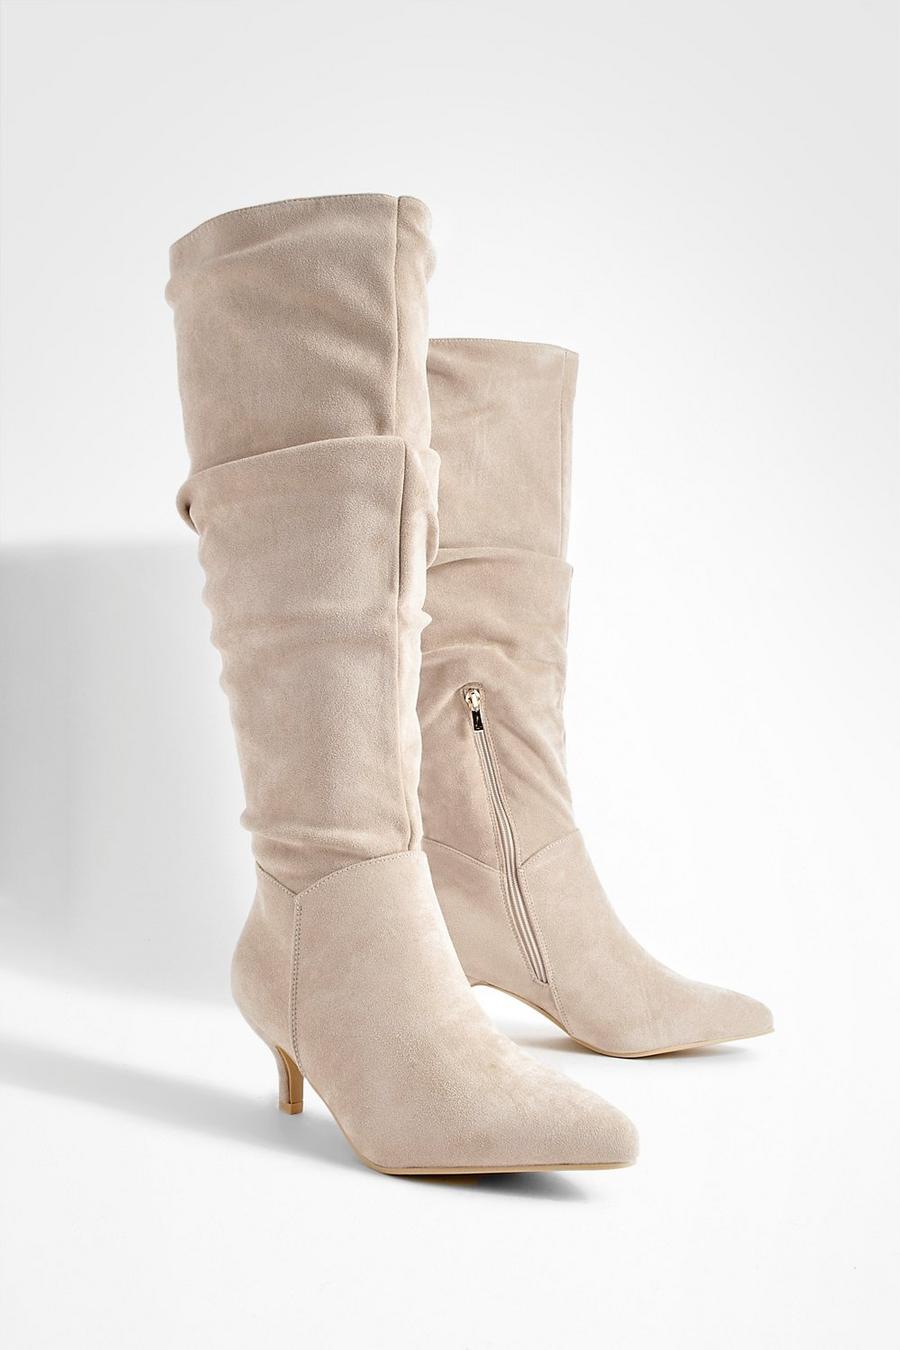 Stone Low Stiletto Knee High Slouchy Boots